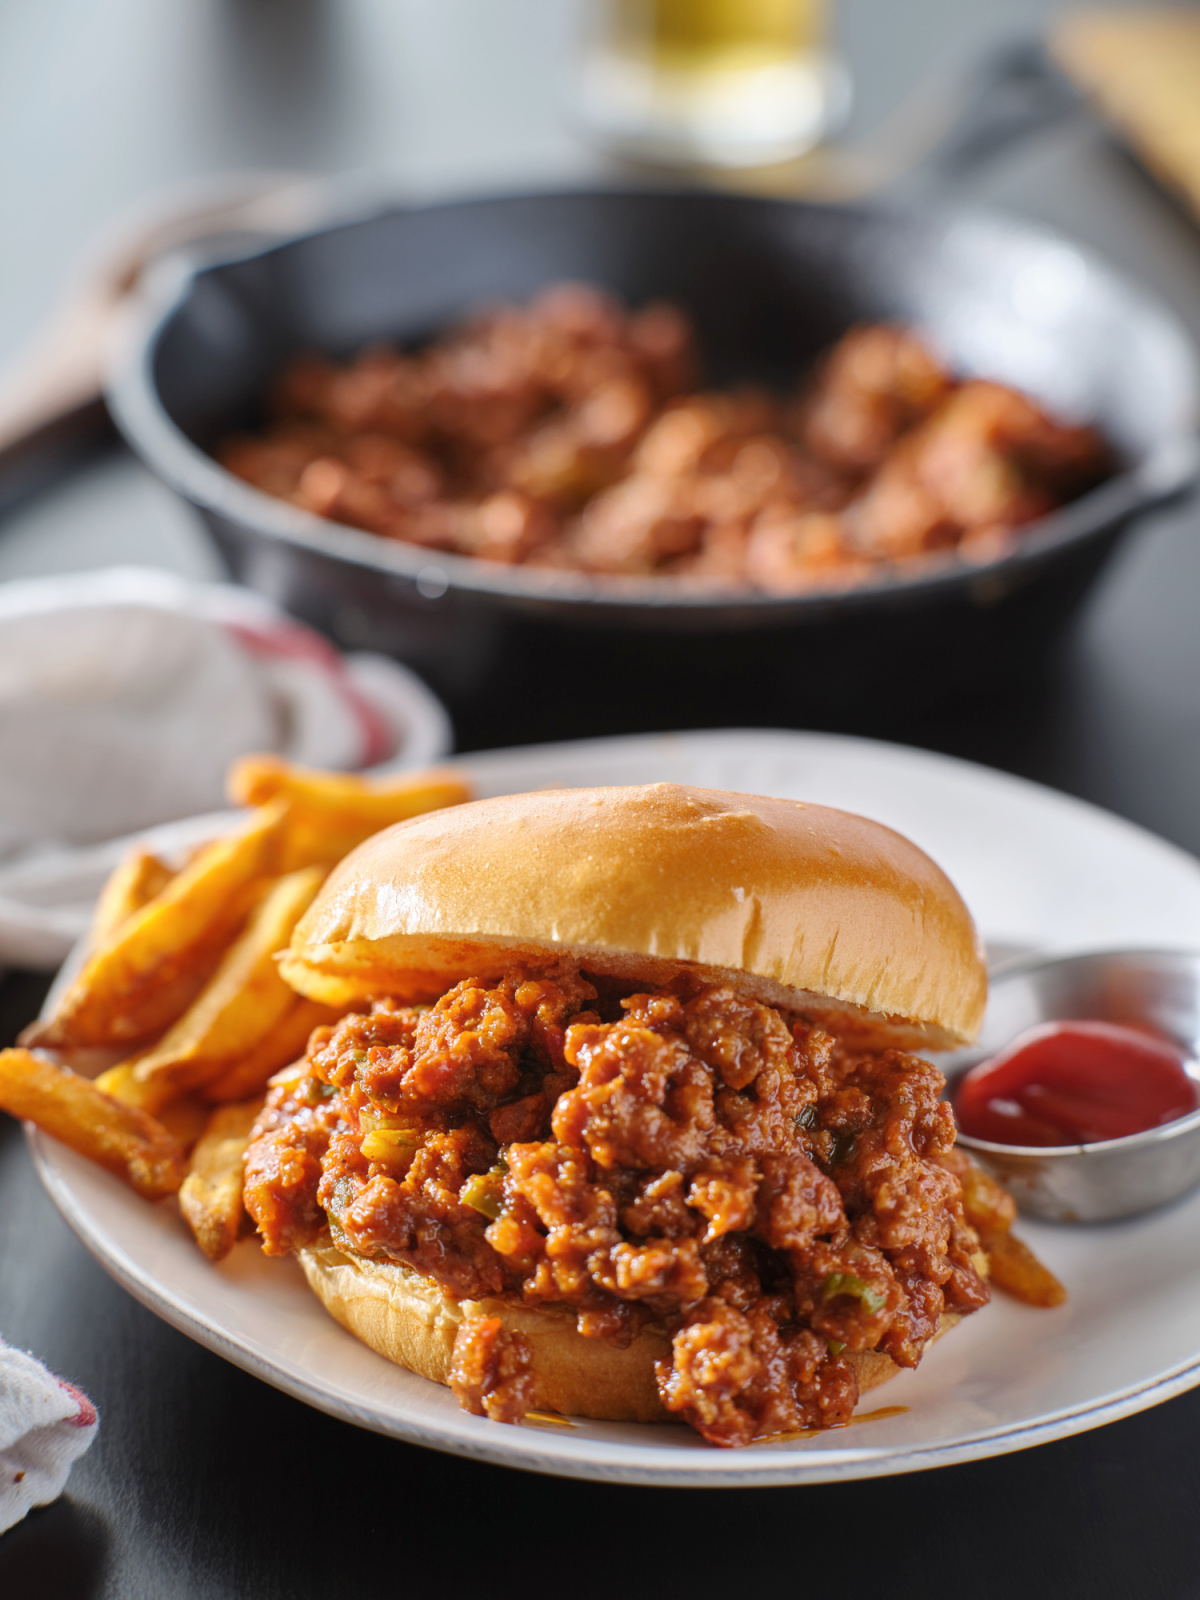 Sloppy Joe Sandwich piled high with ground beef, onions, peppers in a tomato sauce is a classic dinner.